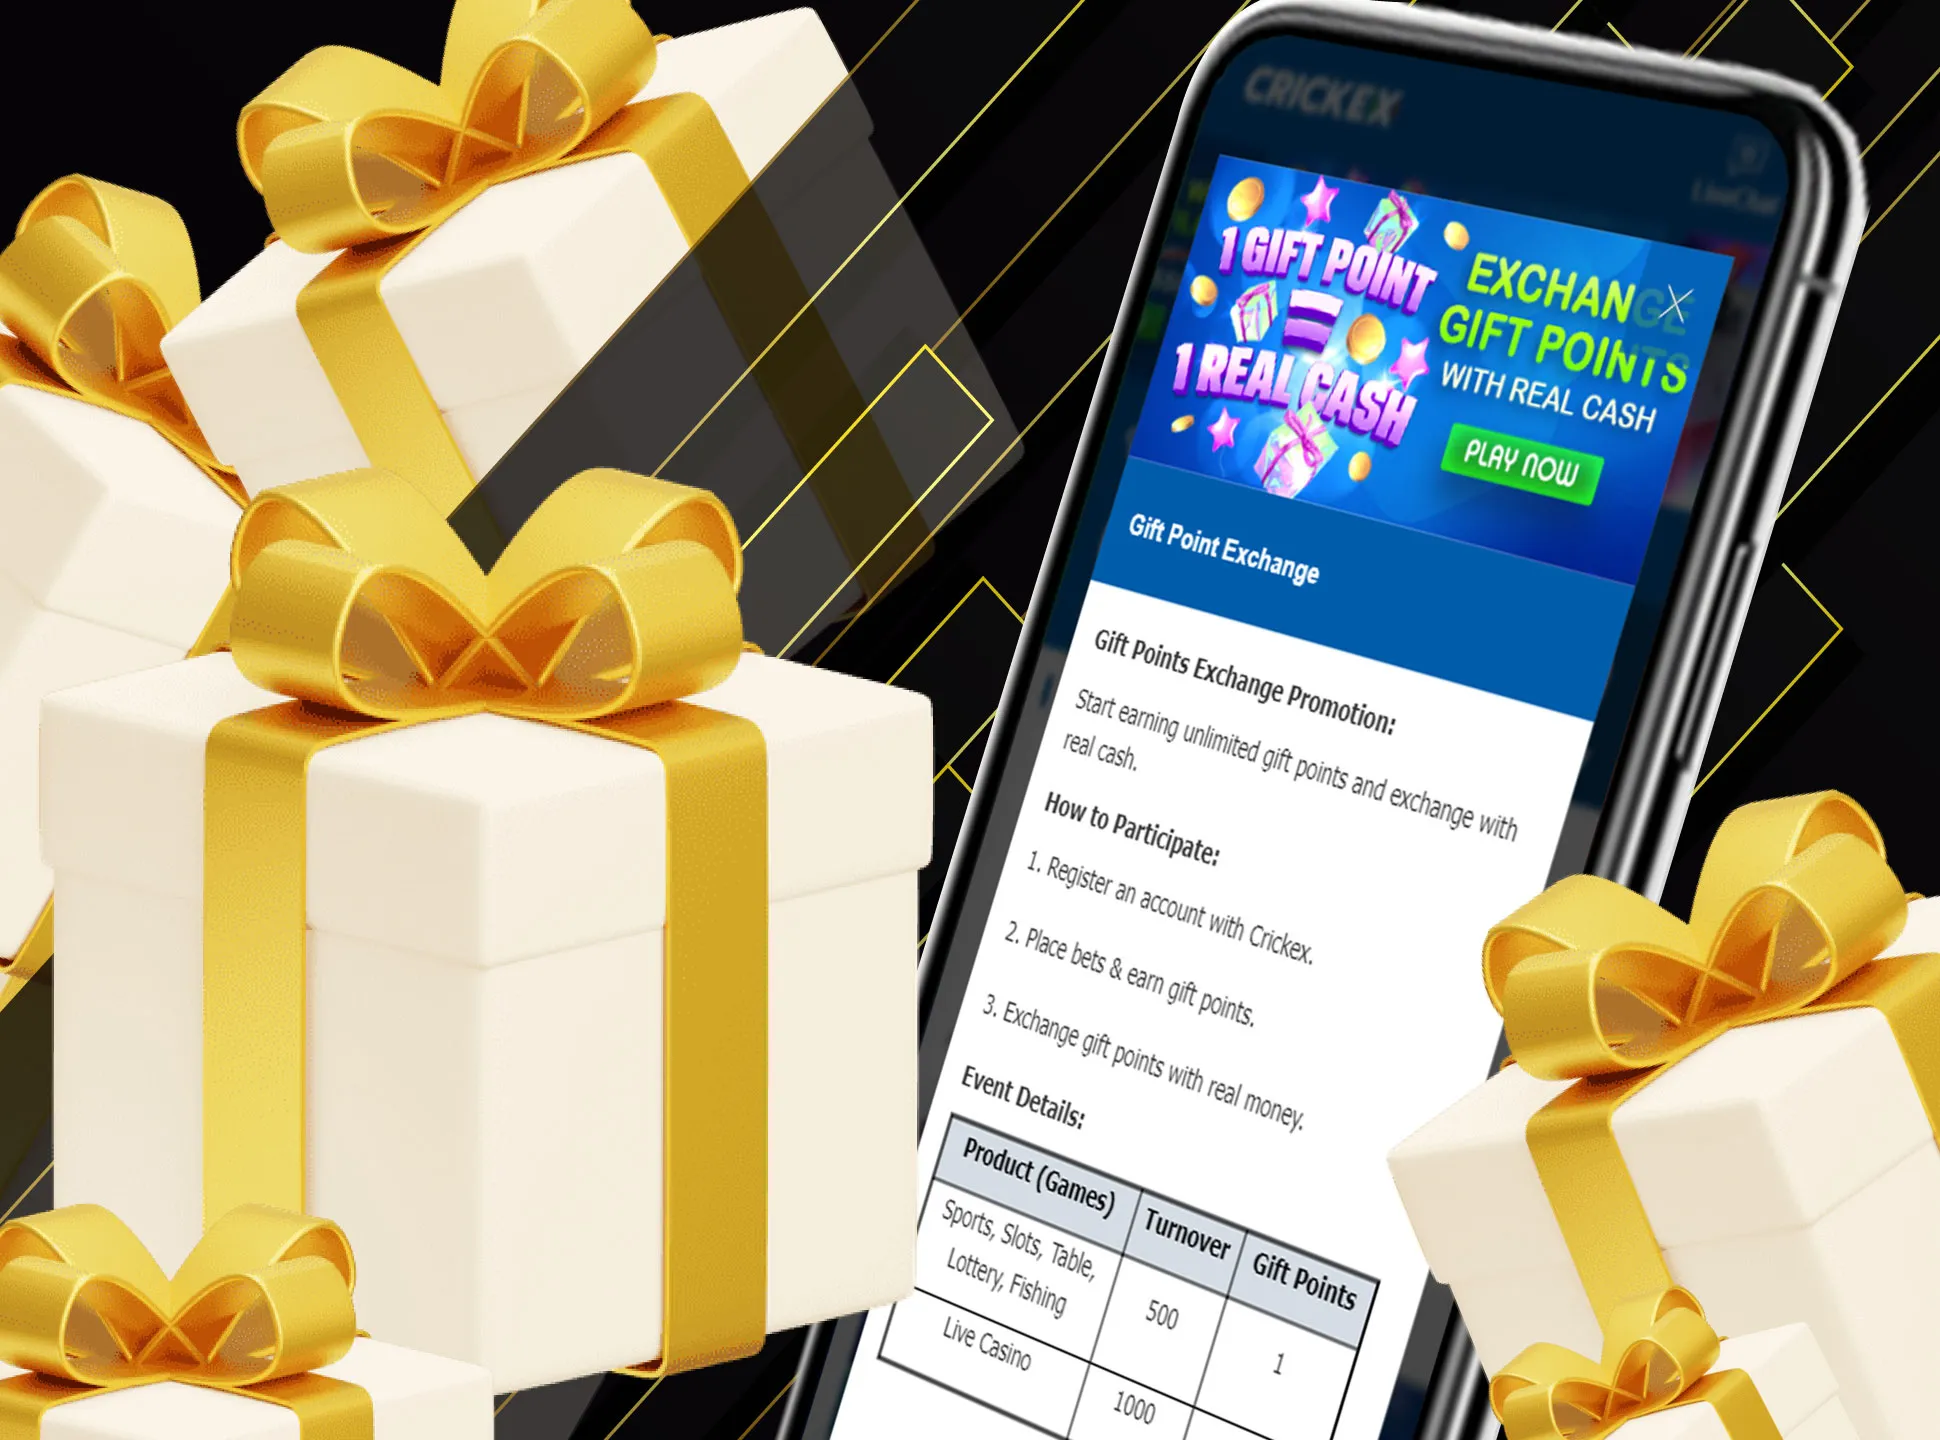 Crickex app offers all the same bonuses and promotions as the web version does.